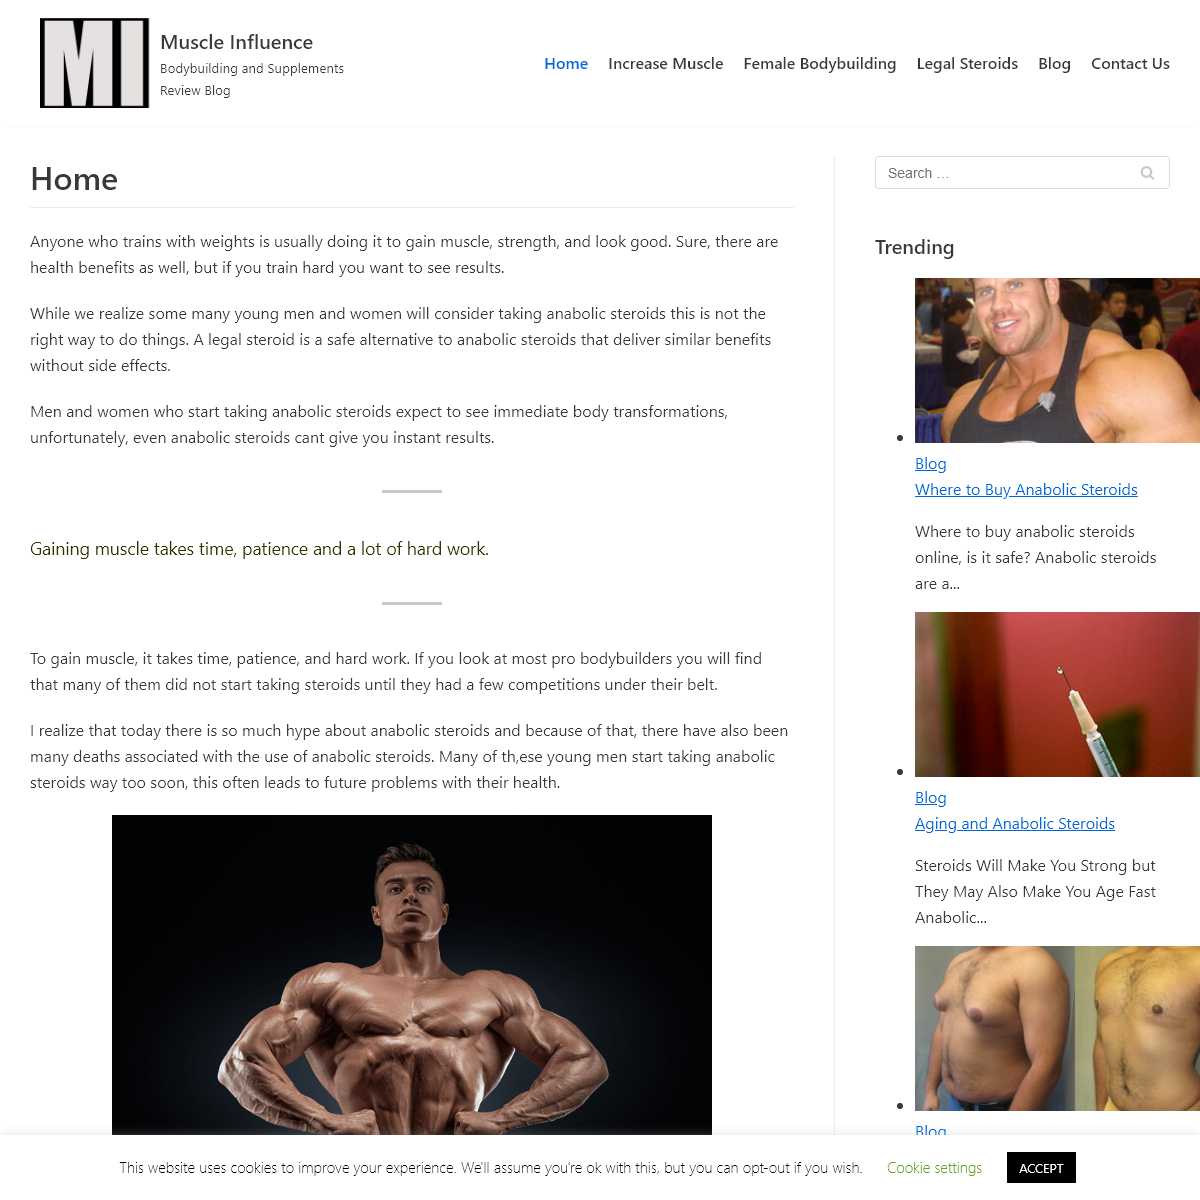 A complete backup of muscleinfluence.com